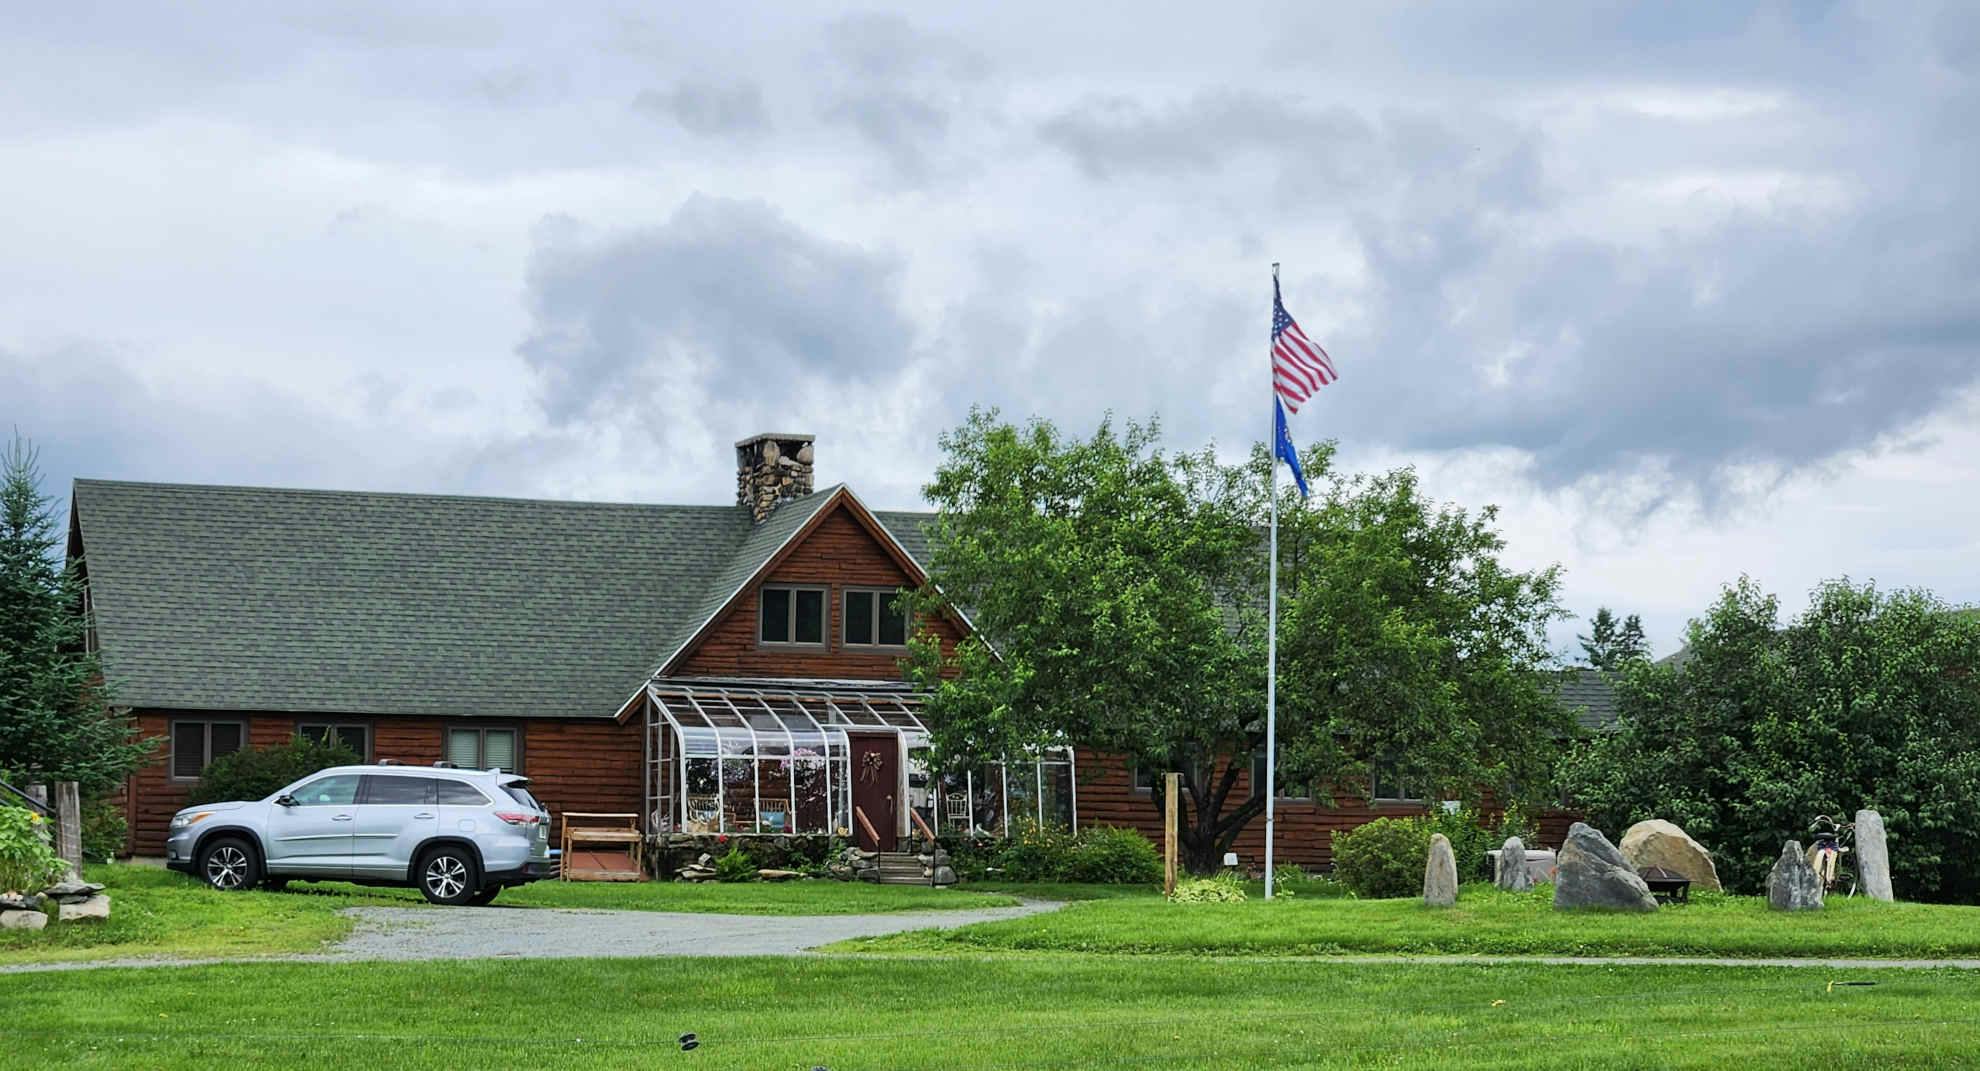 Exterior view of the Inn at Oxbow Acres with flags prominently displayed.